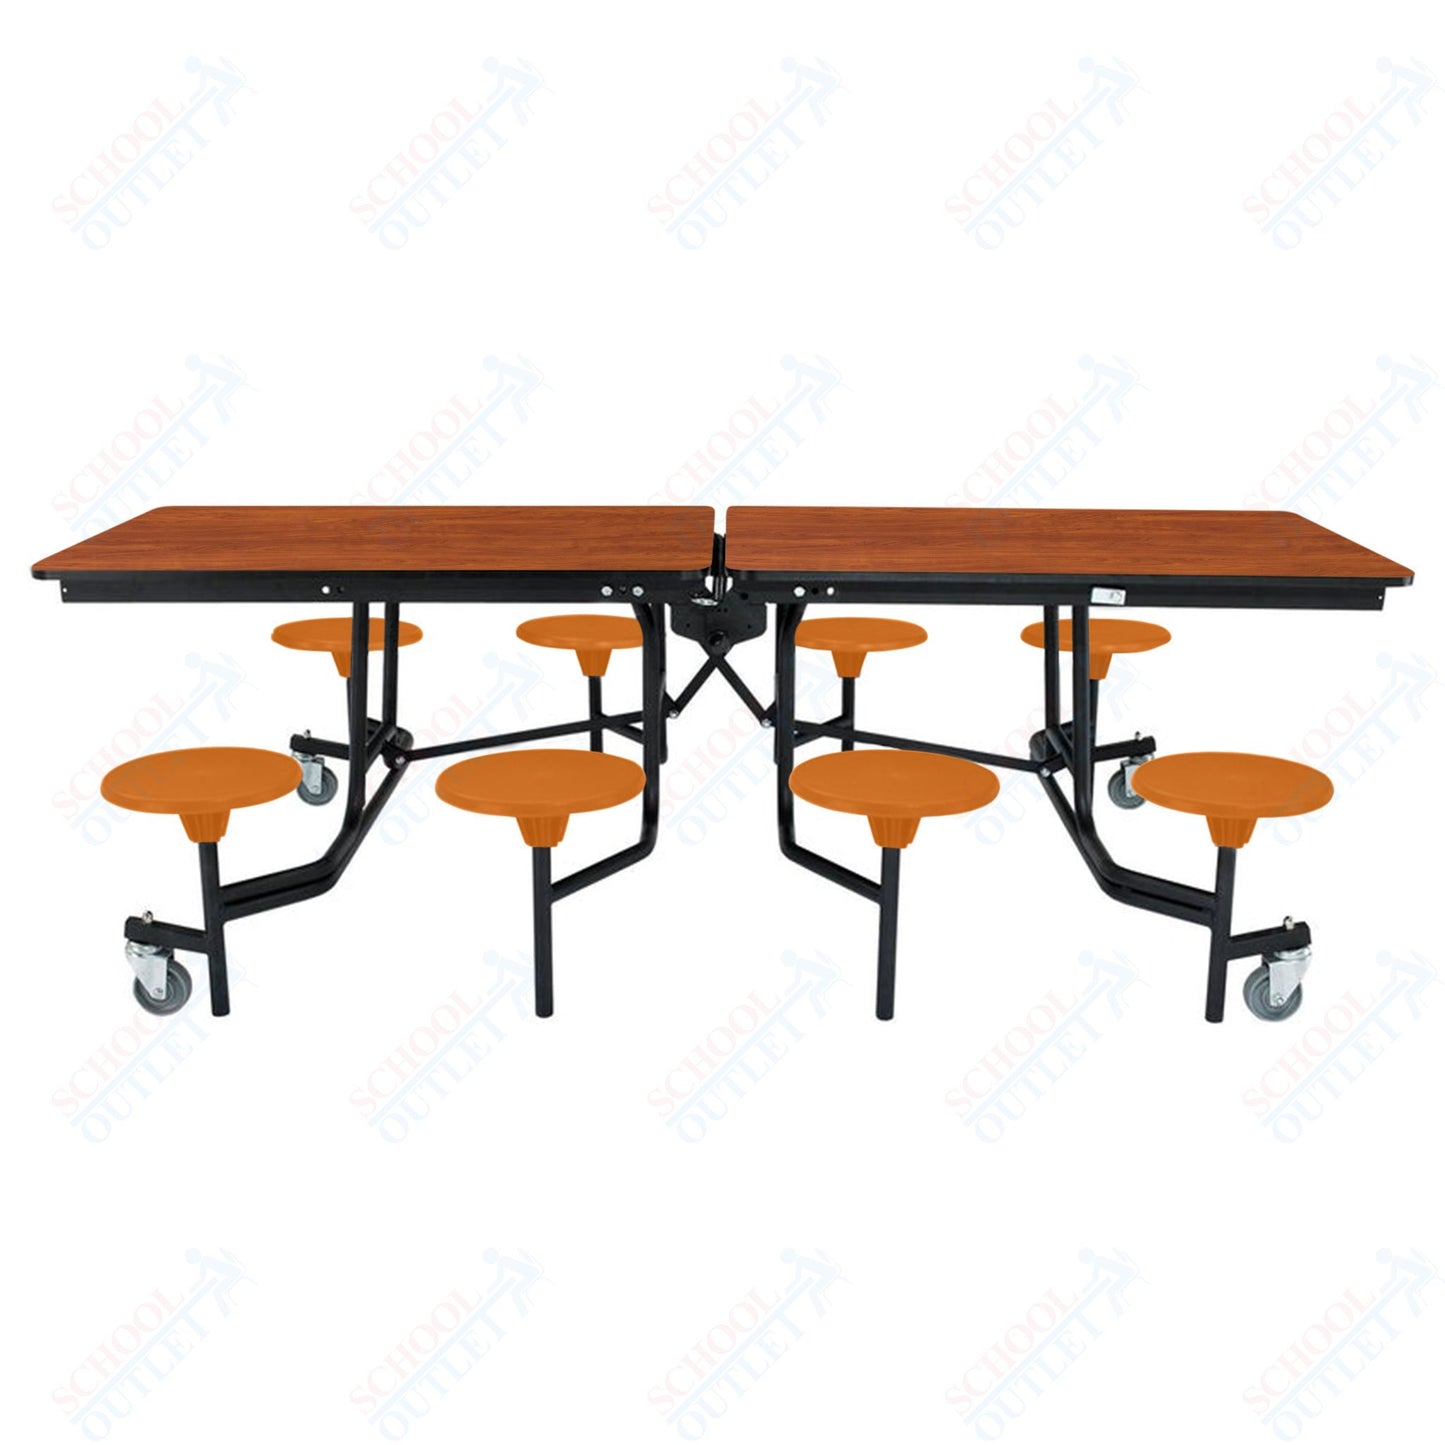 NPS Mobile Cafeteria Table - 30" W x 8' L - 8 Stools - Particleboard Core - T-Molding Edge - Black Powdercoated Frame